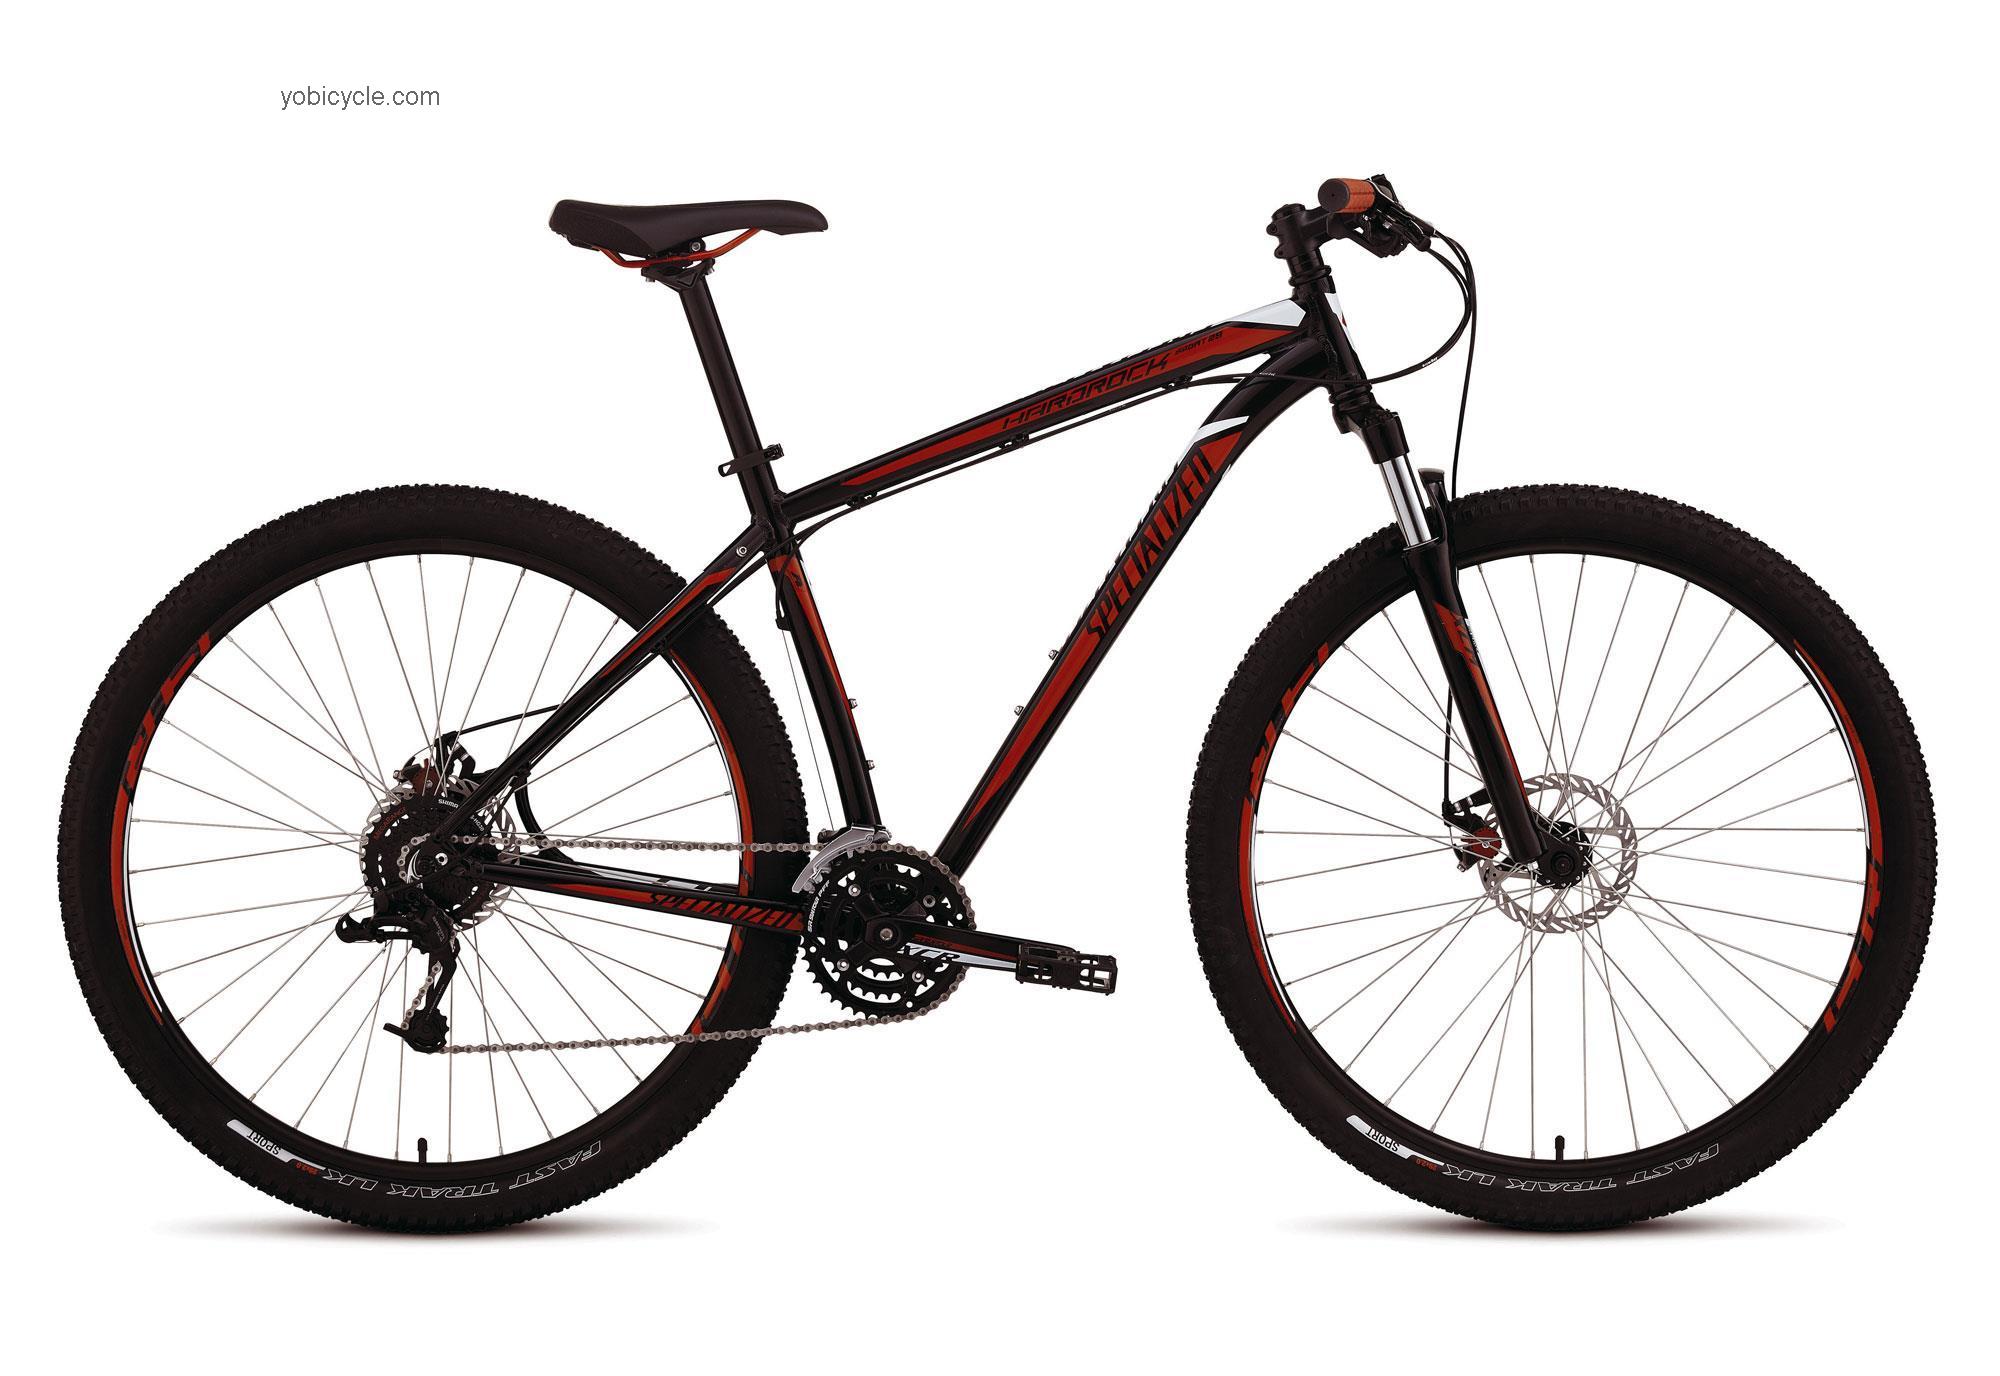 Specialized Hardrock Sport Disc 29 2012 comparison online with competitors